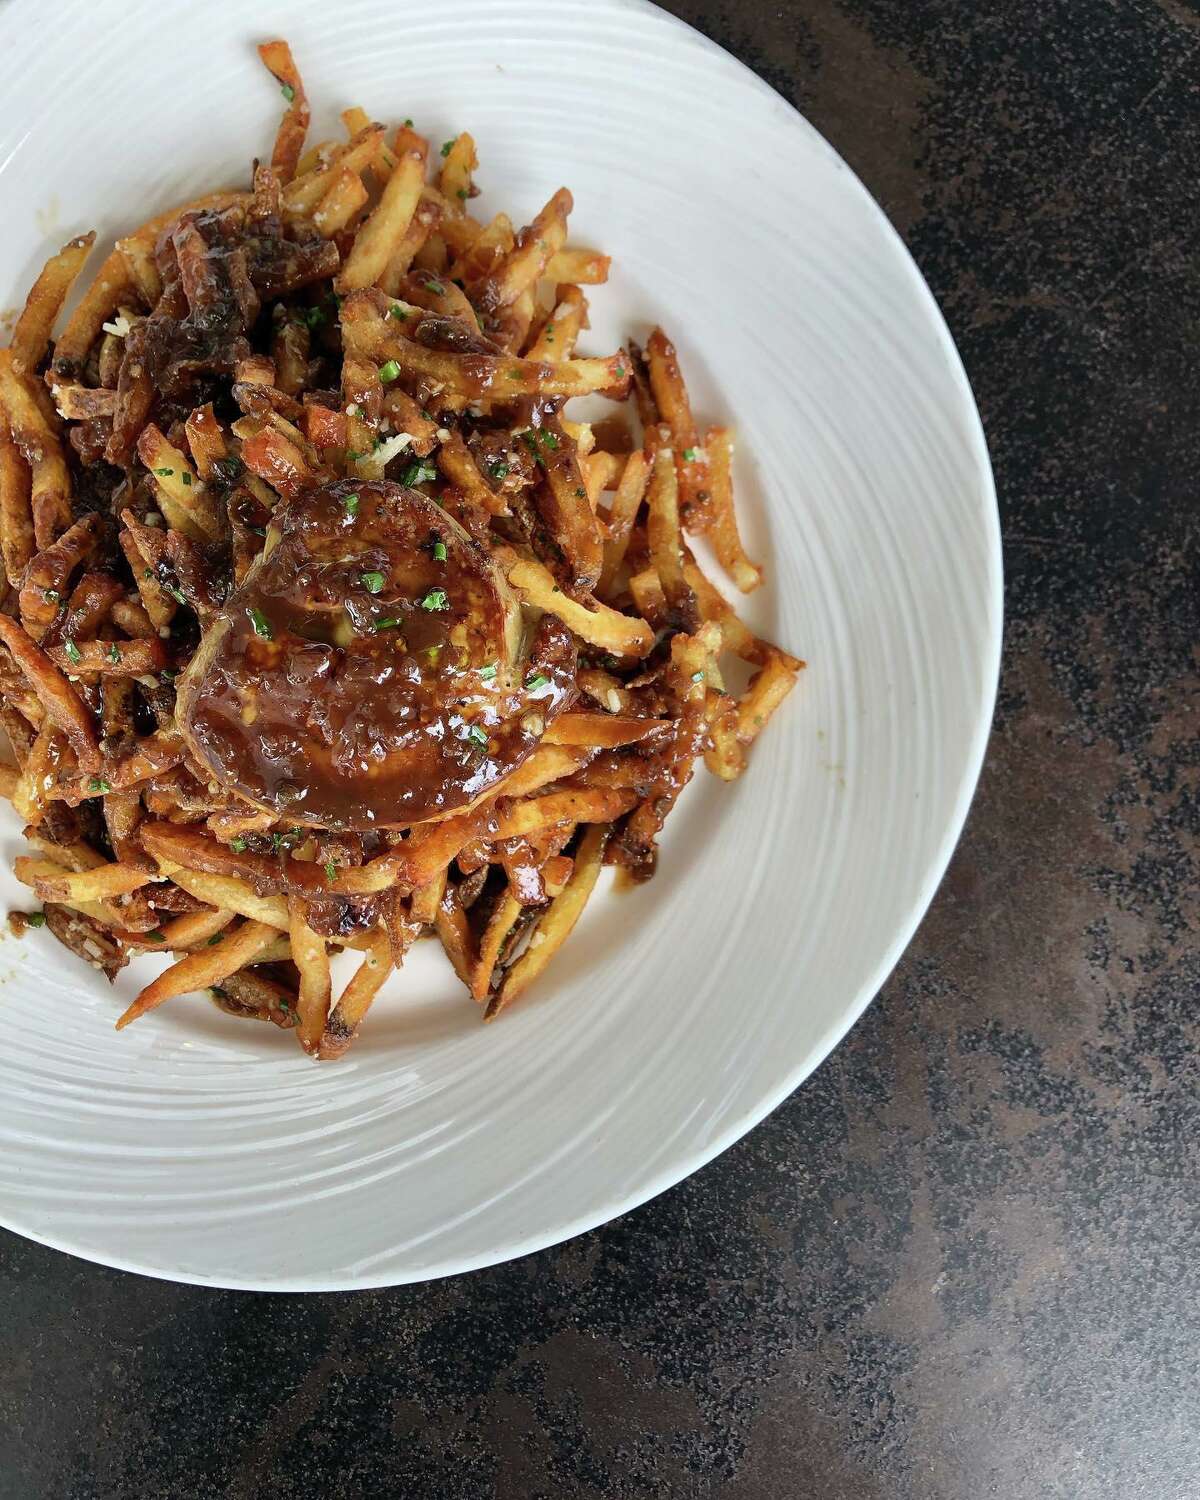 Lazy Lane Fries made with foie gras and truffle oil are a secret menu item at Brasserie 19